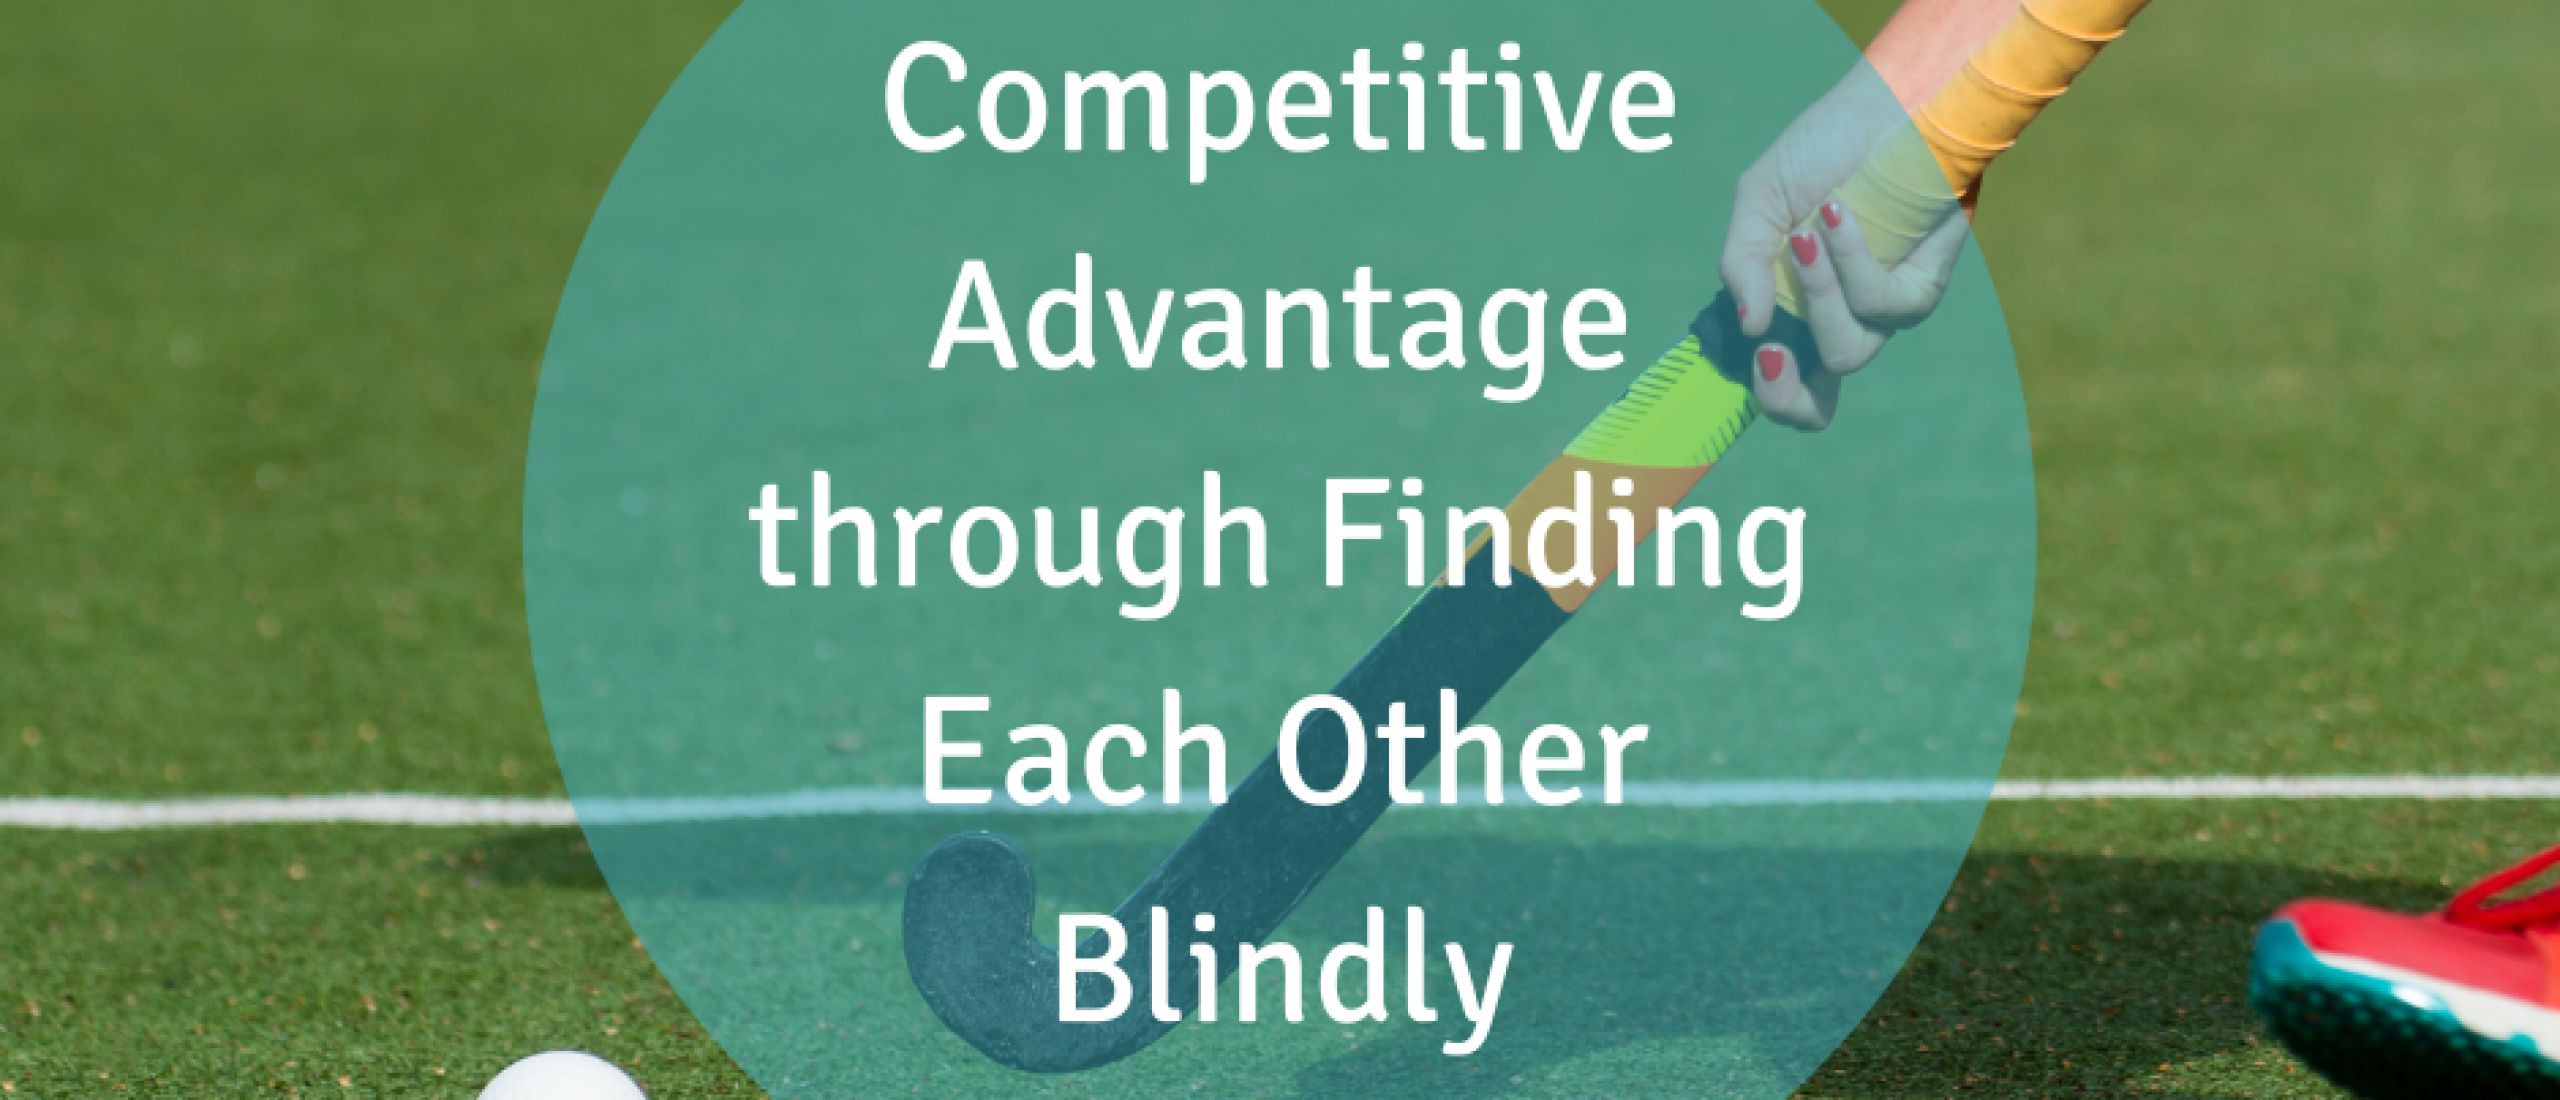 Competitive Advantage through Finding Each Other Blindly